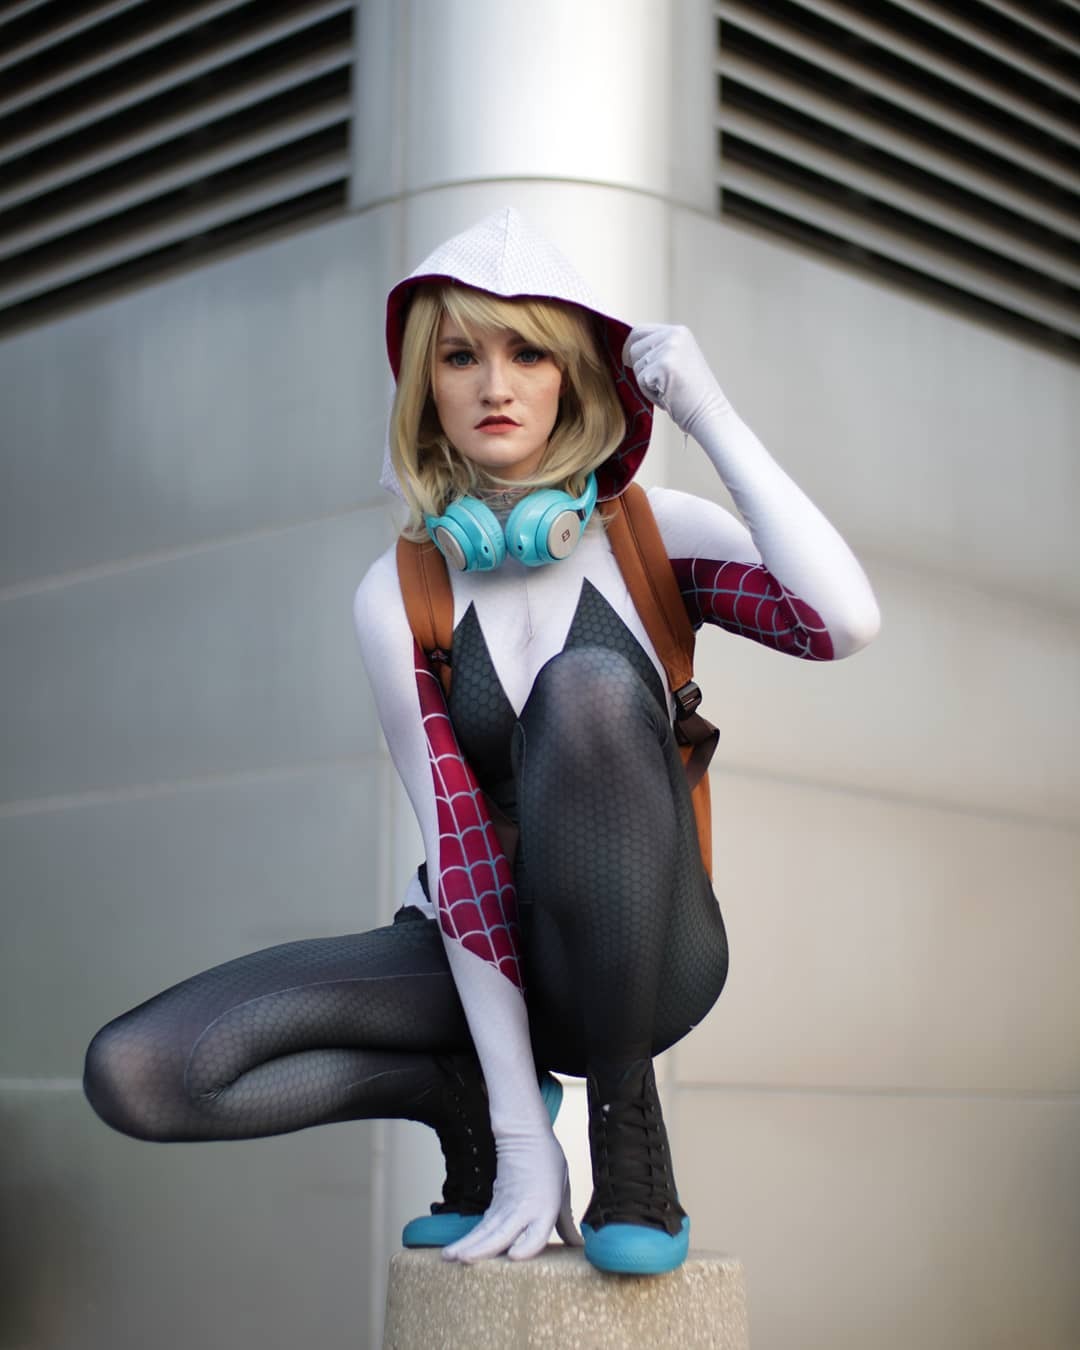 Cosplay Stories : SpiderGwen by ladyashexii - Food and Cosplay